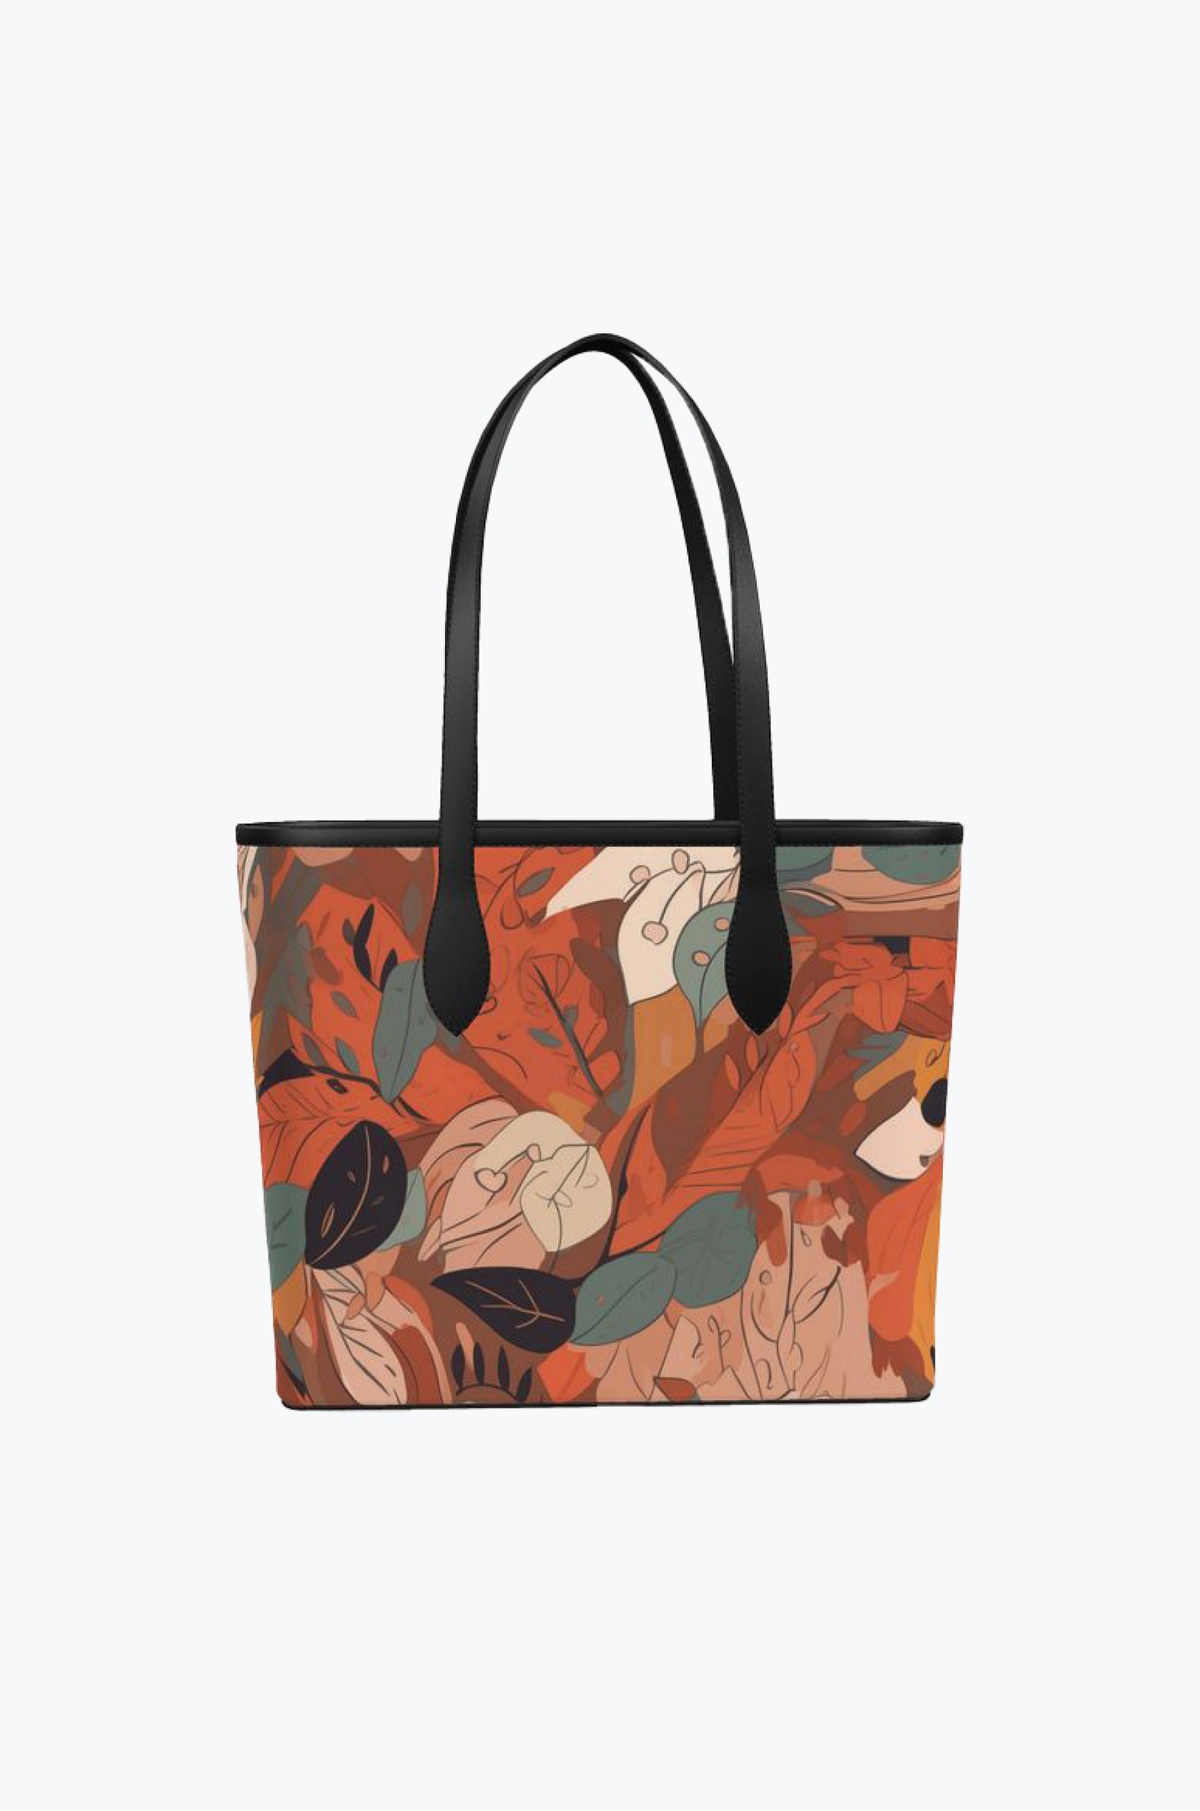 Autumn Carnation 100% Leather Tote Bag | Hypoallergenic - Allergy Friendly - Naturally Free